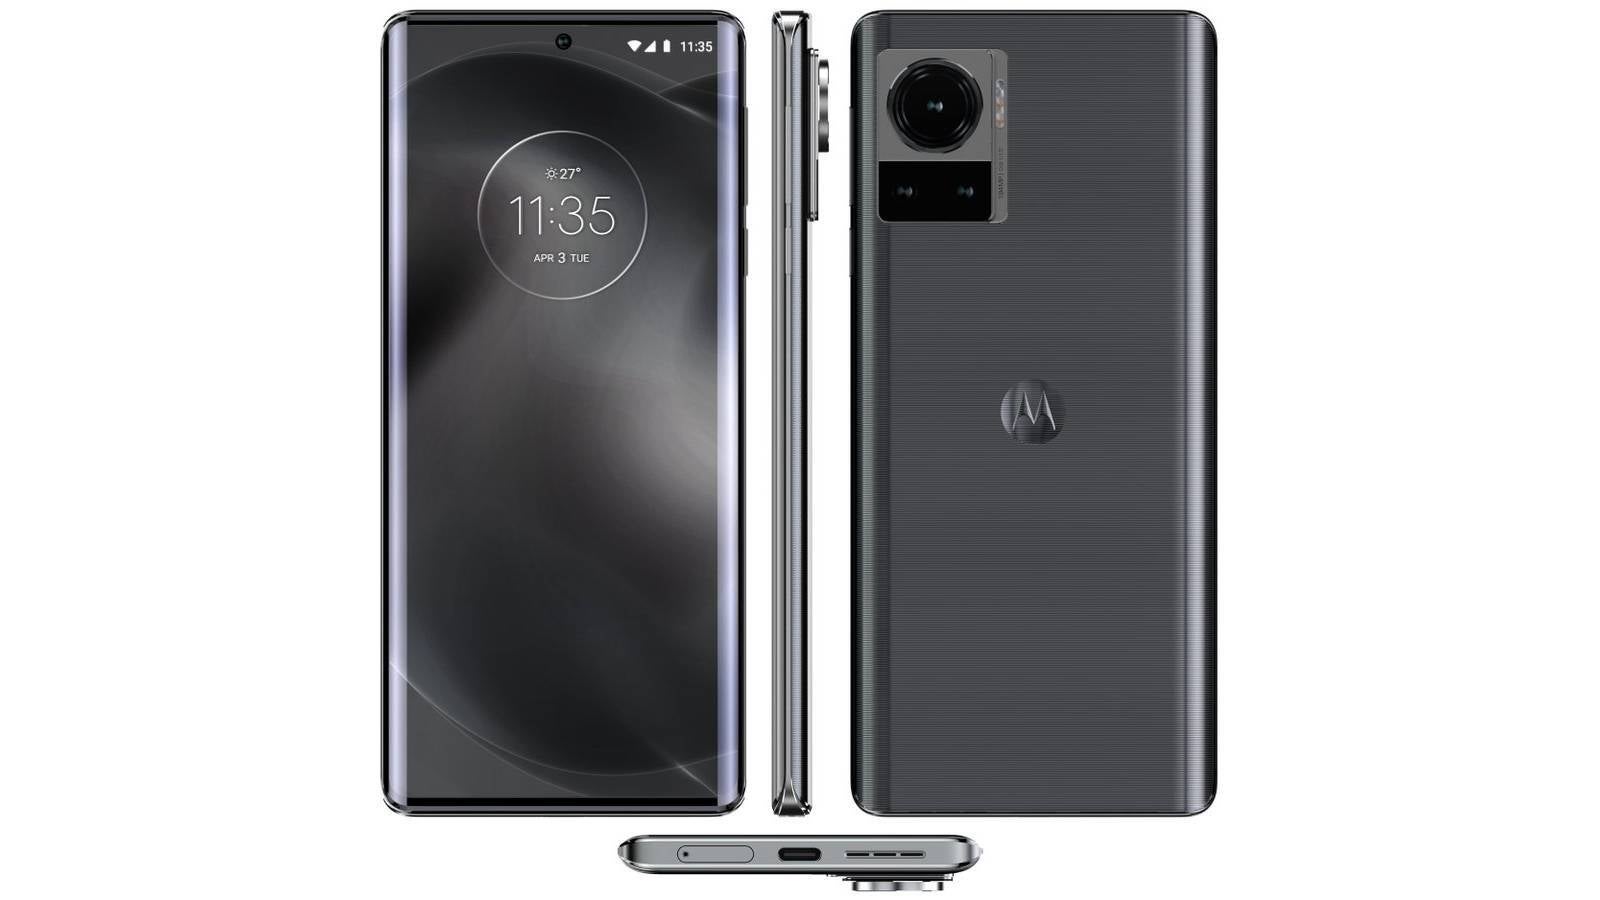 Previously leaked Frontier image - Flagship Motorola Frontier's unsightly but potentially game-changing 200MP sensor leaked